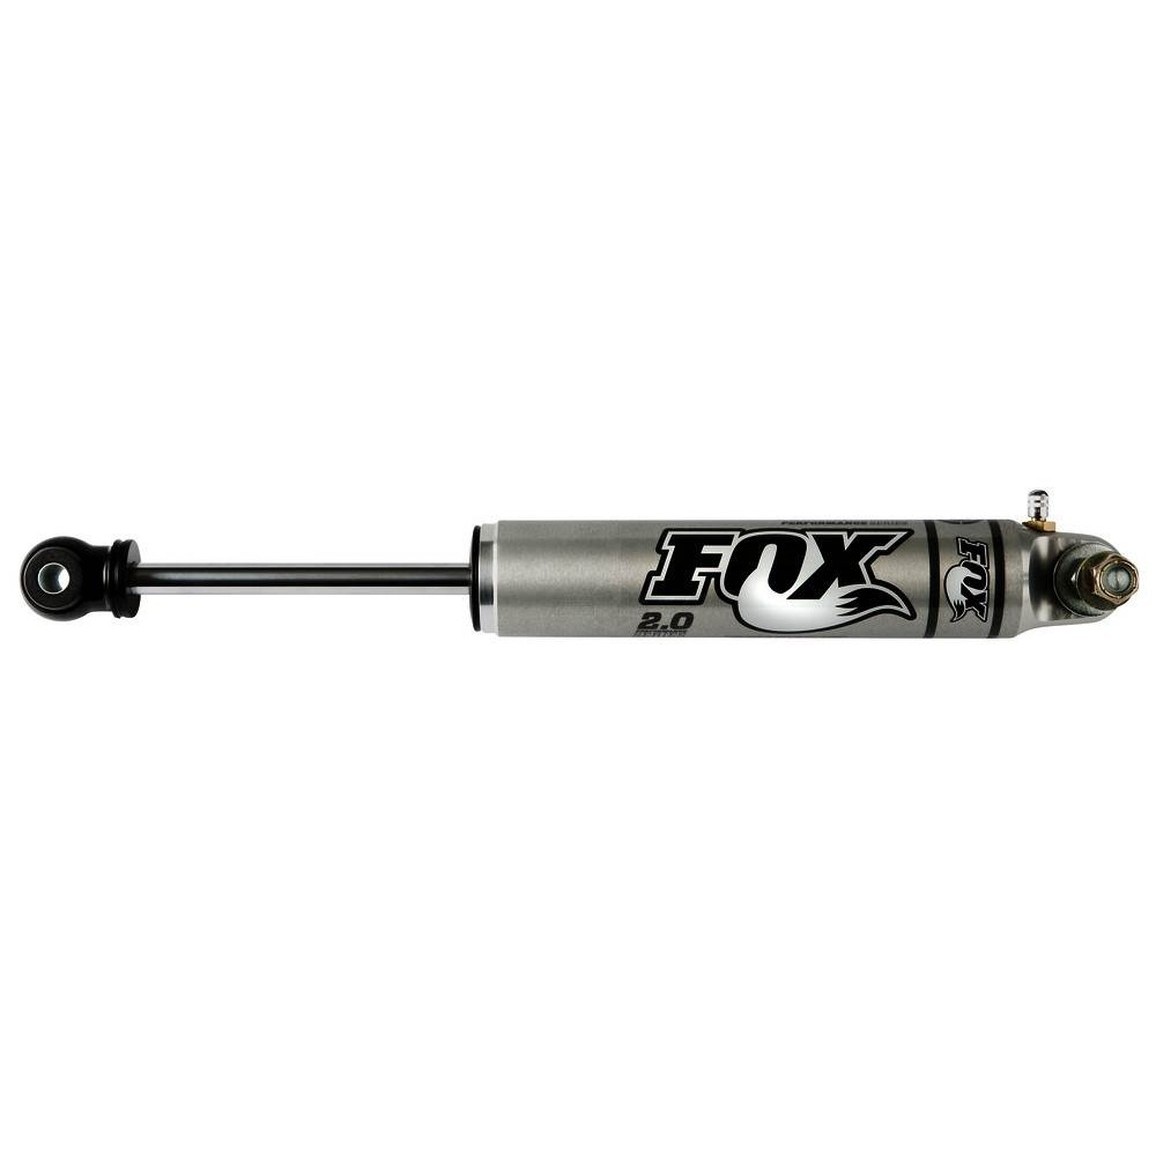 08-16 FORD SD STEERING STABILIZER, PS, 2.0, IFP, 10.6IN